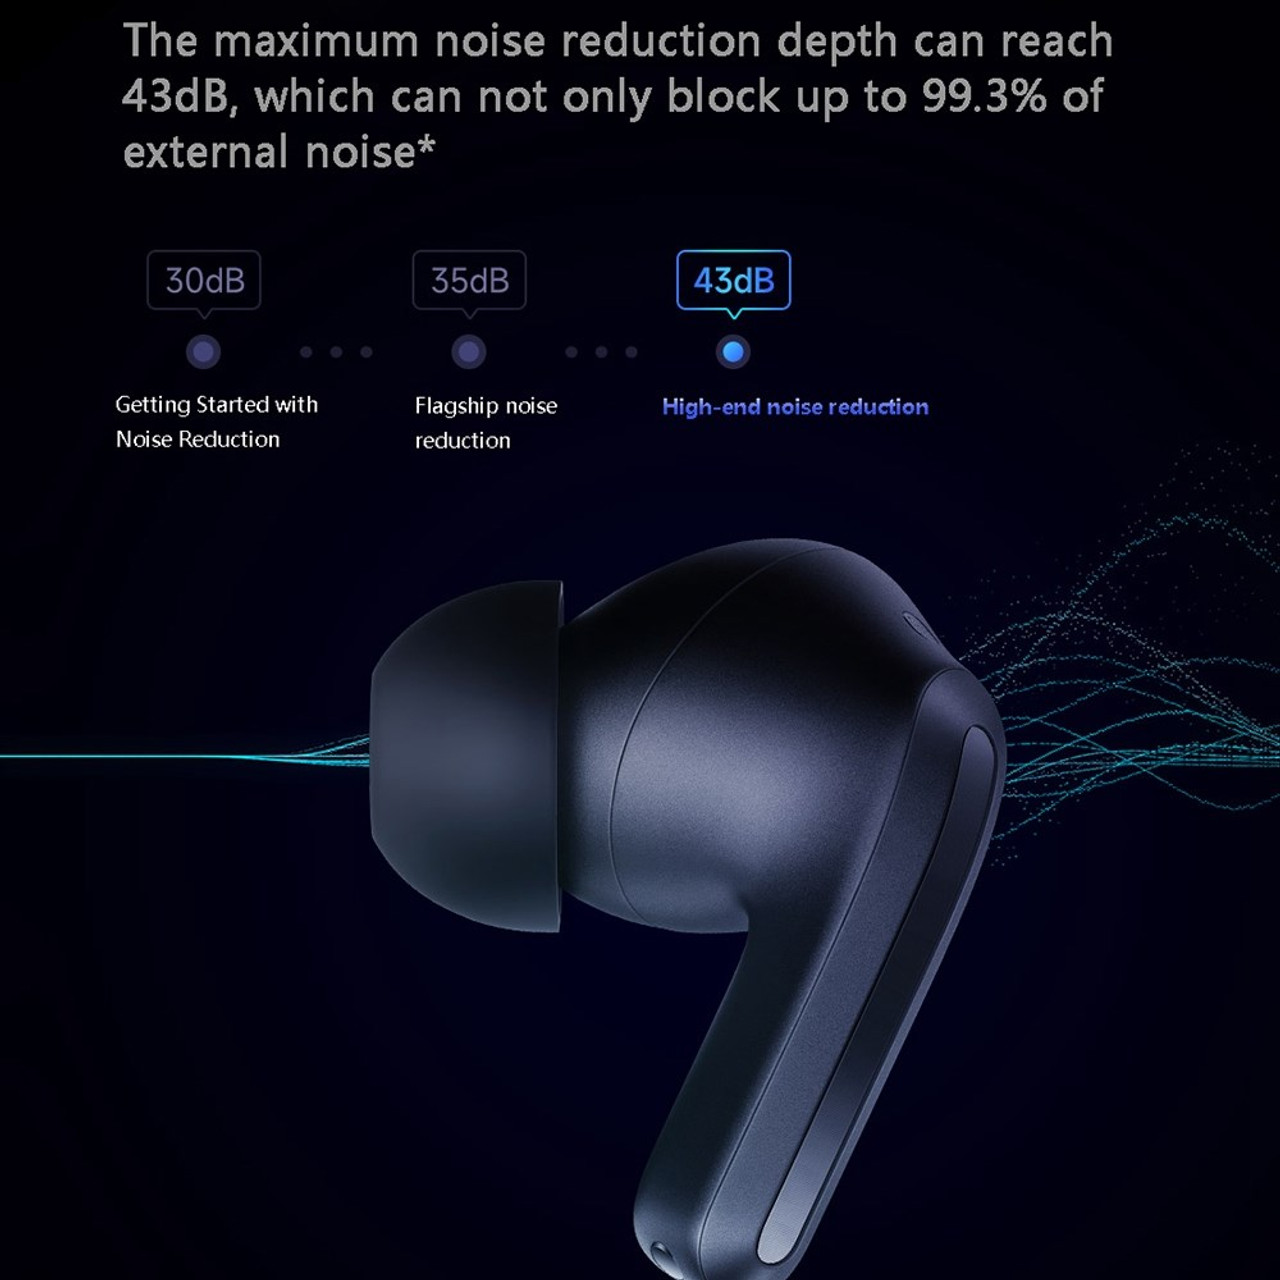 New Xiaomi Redmi Buds 4 Pro Earbuds Bluetooth 5.3 Earphones Noise  Cancellation